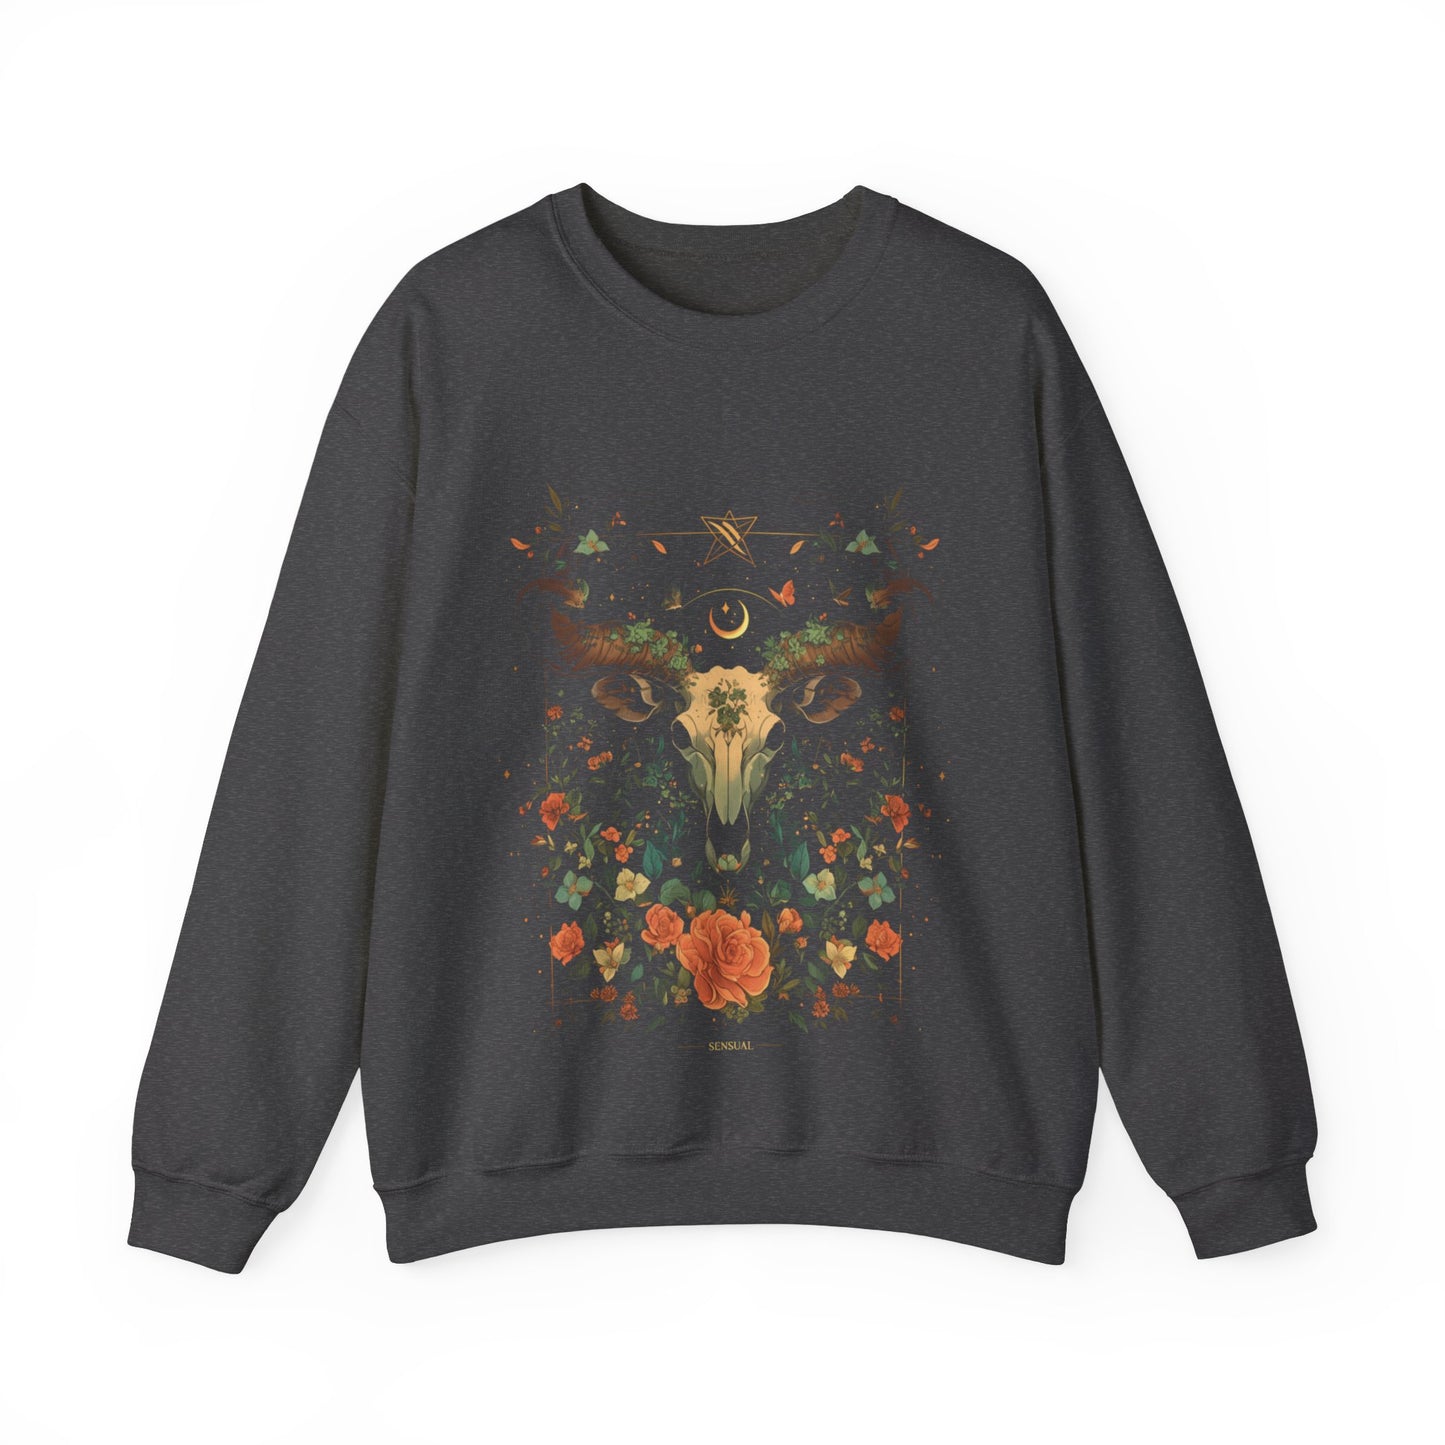 Blossoming Taurus: The Astrological Garden Sweater